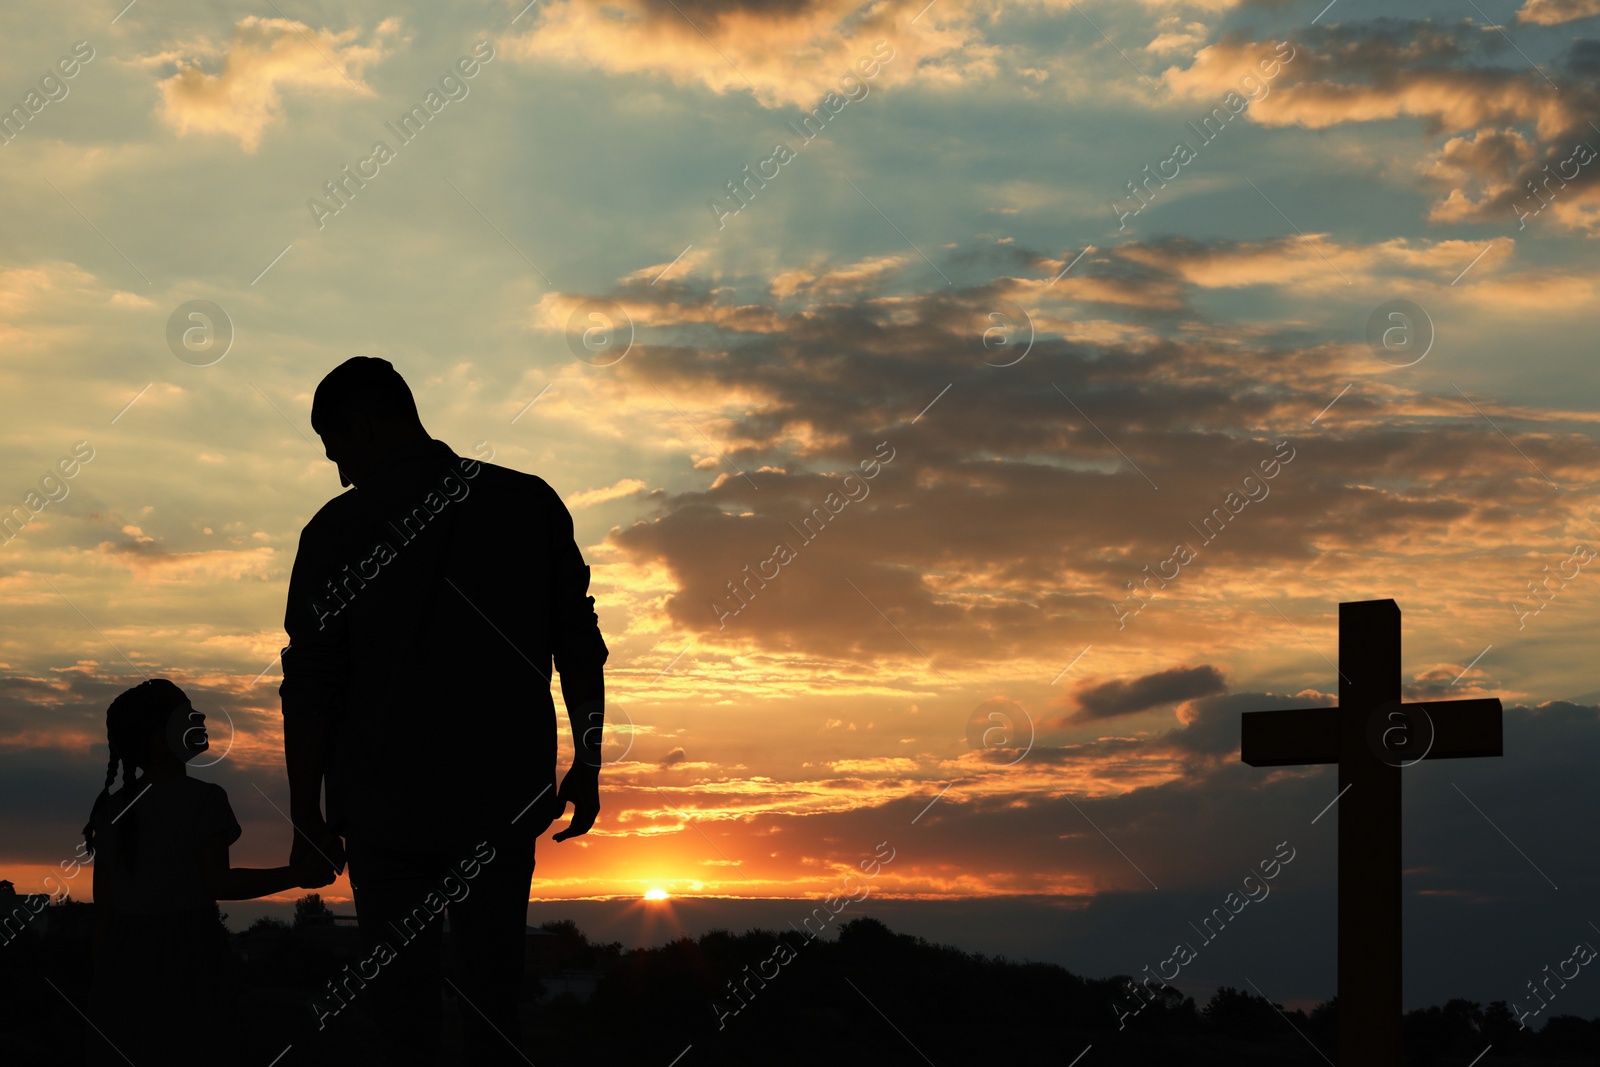 Image of Silhouettes of godparent with child in field at sunset